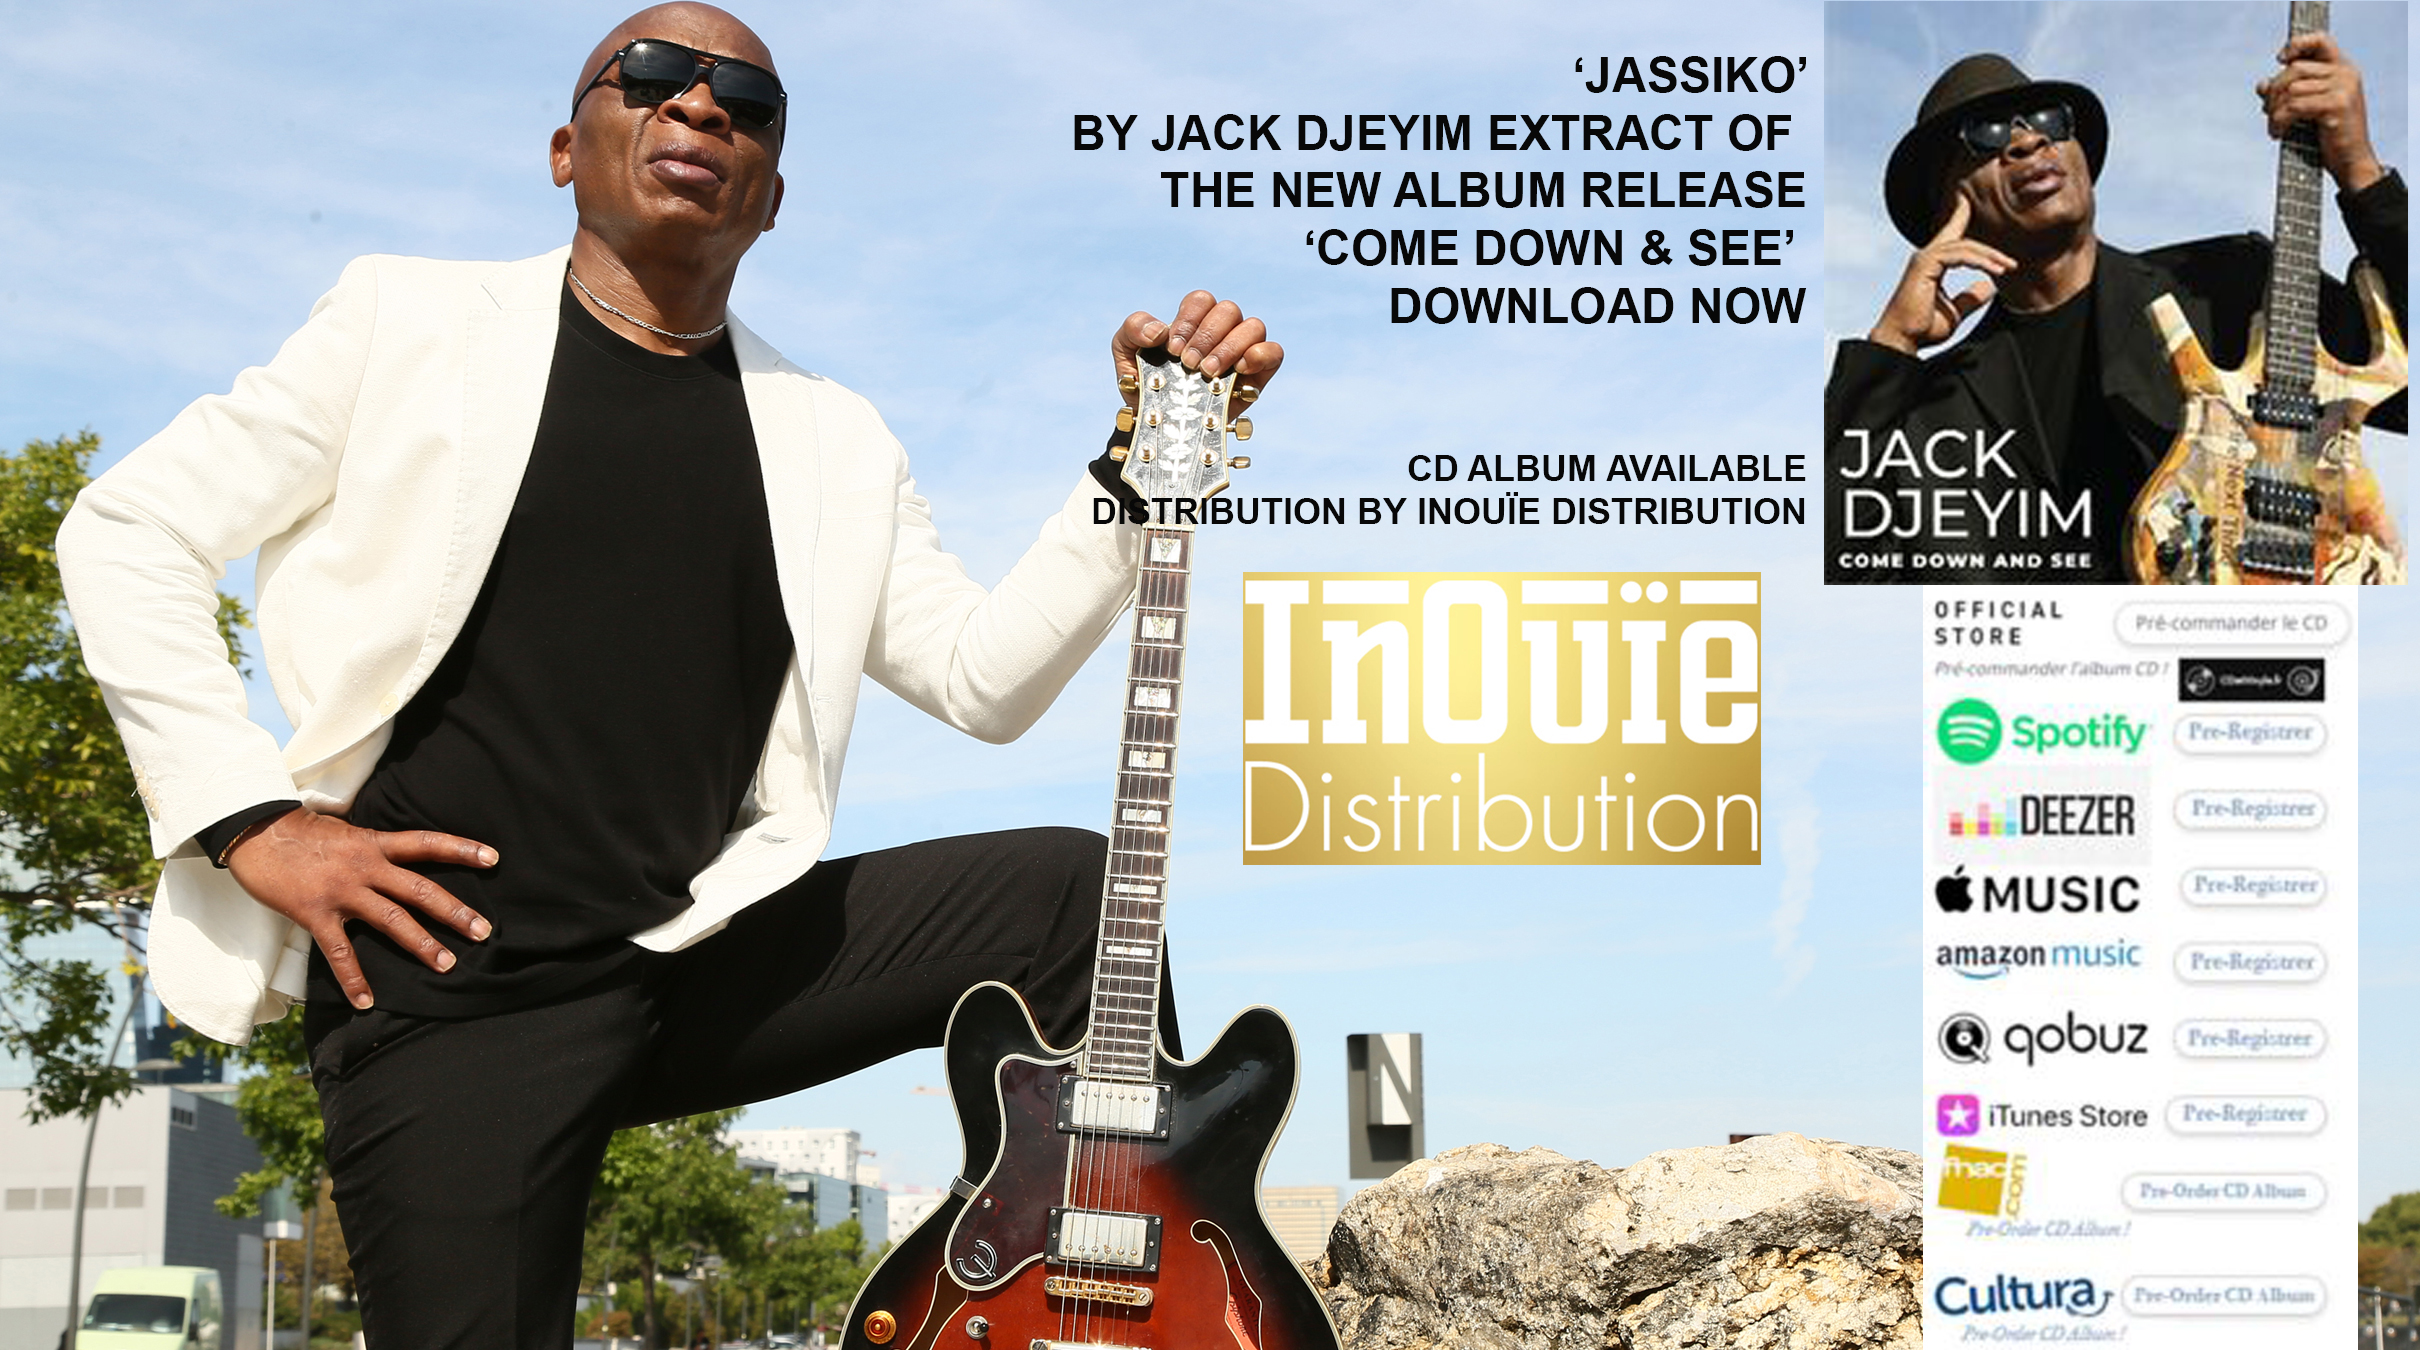 AFRICA-VOGUE-COVER-JASSIKO-by-Jack-DJEYIM-extract-of-the-New-Album-release-Come-Down-&-See-Download-Now-DN-AFRICA-Media-Partner